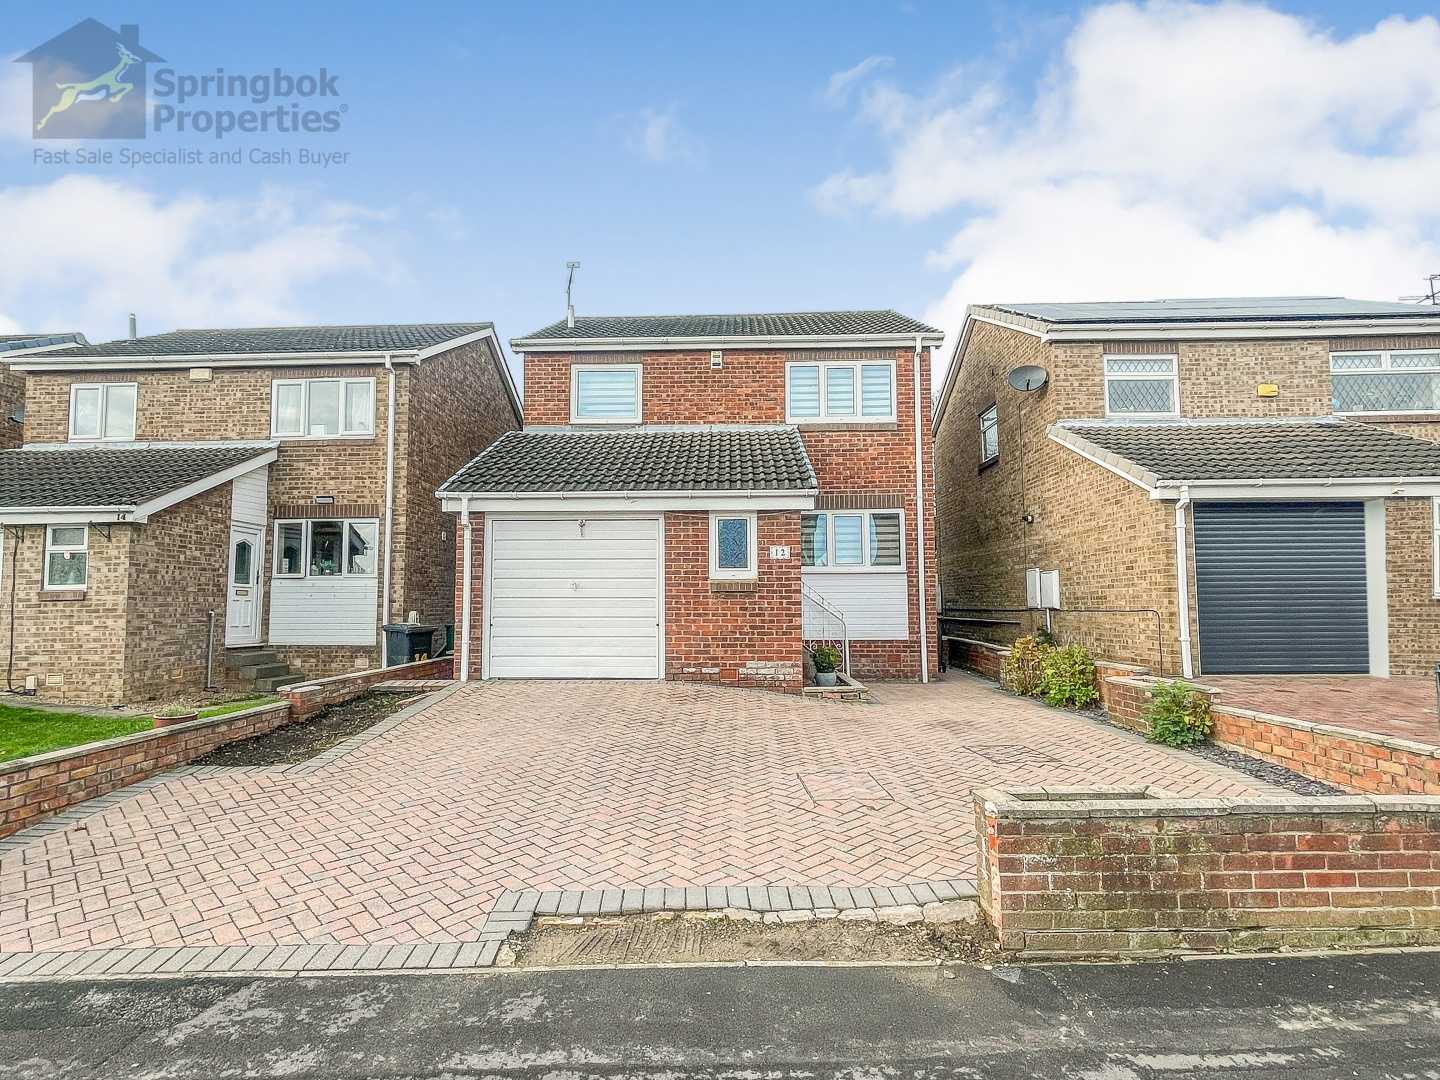 House in Warmsworth, Doncaster 11125559